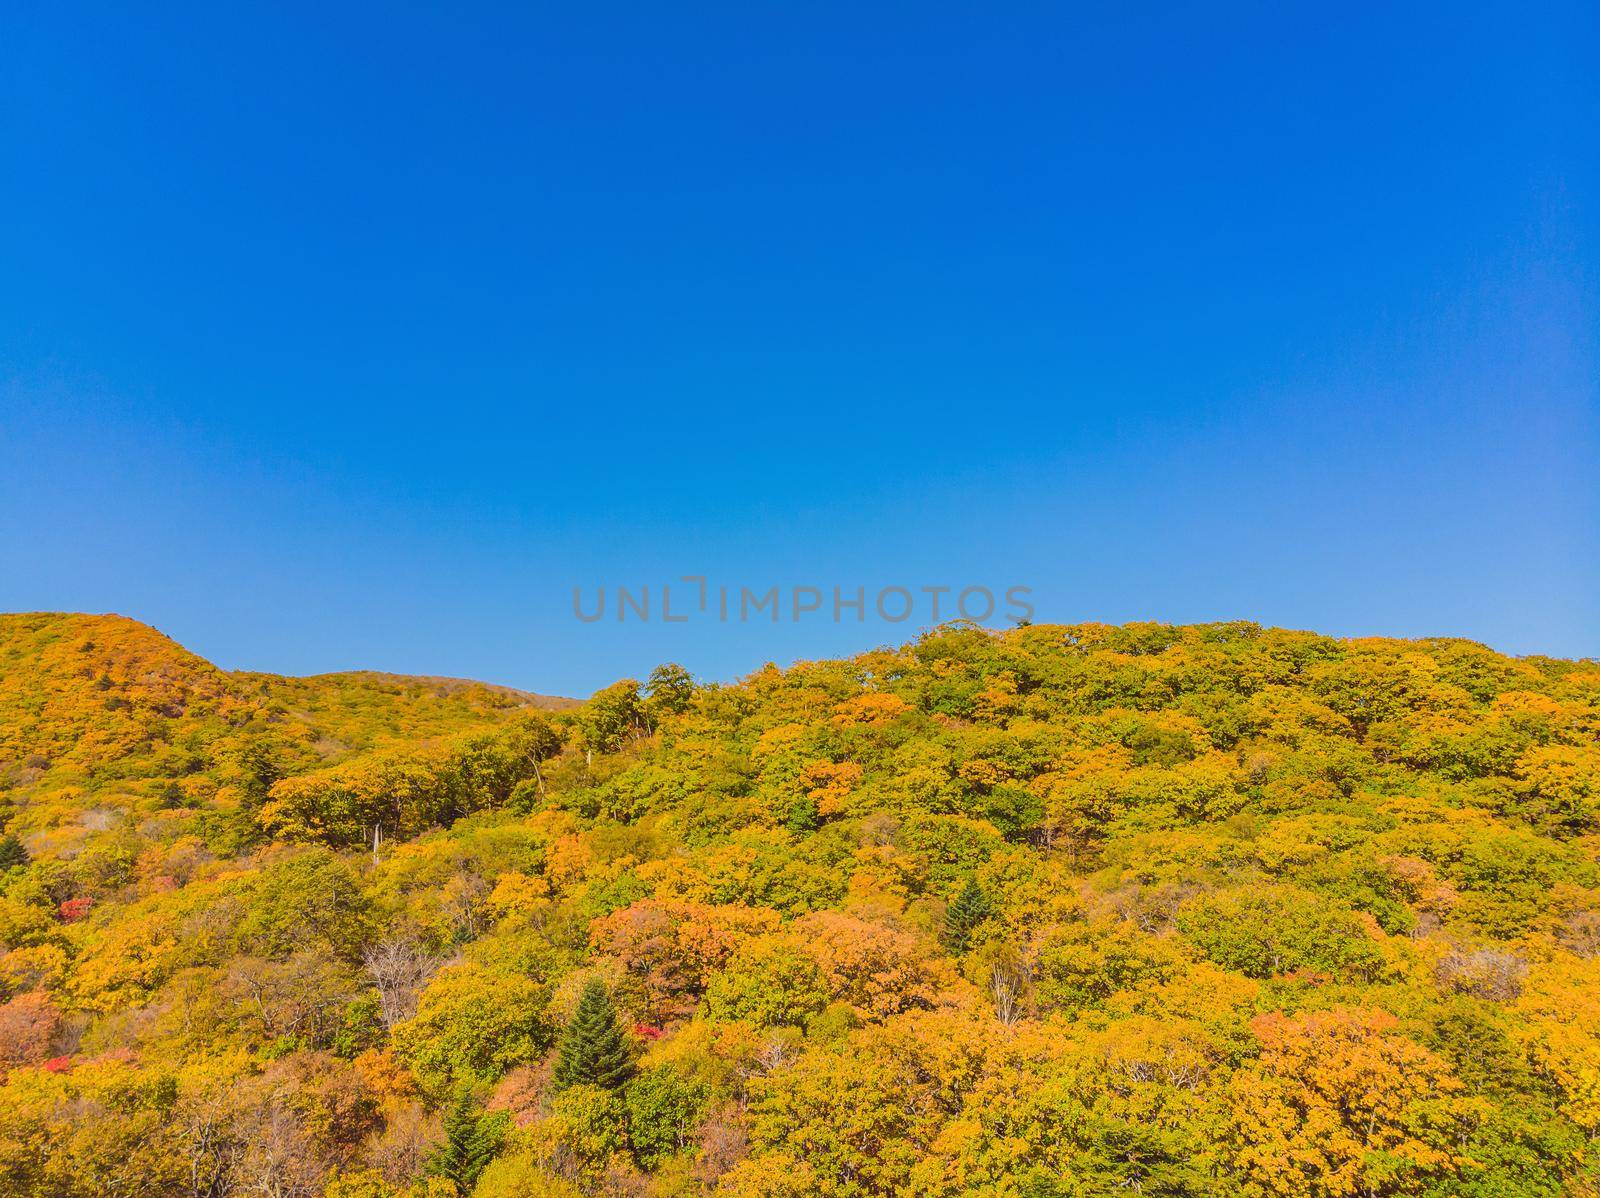 Aerial top down view of autumn forest with green and yellow trees. Mixed deciduous and coniferous forest. Beautiful fall scenery.